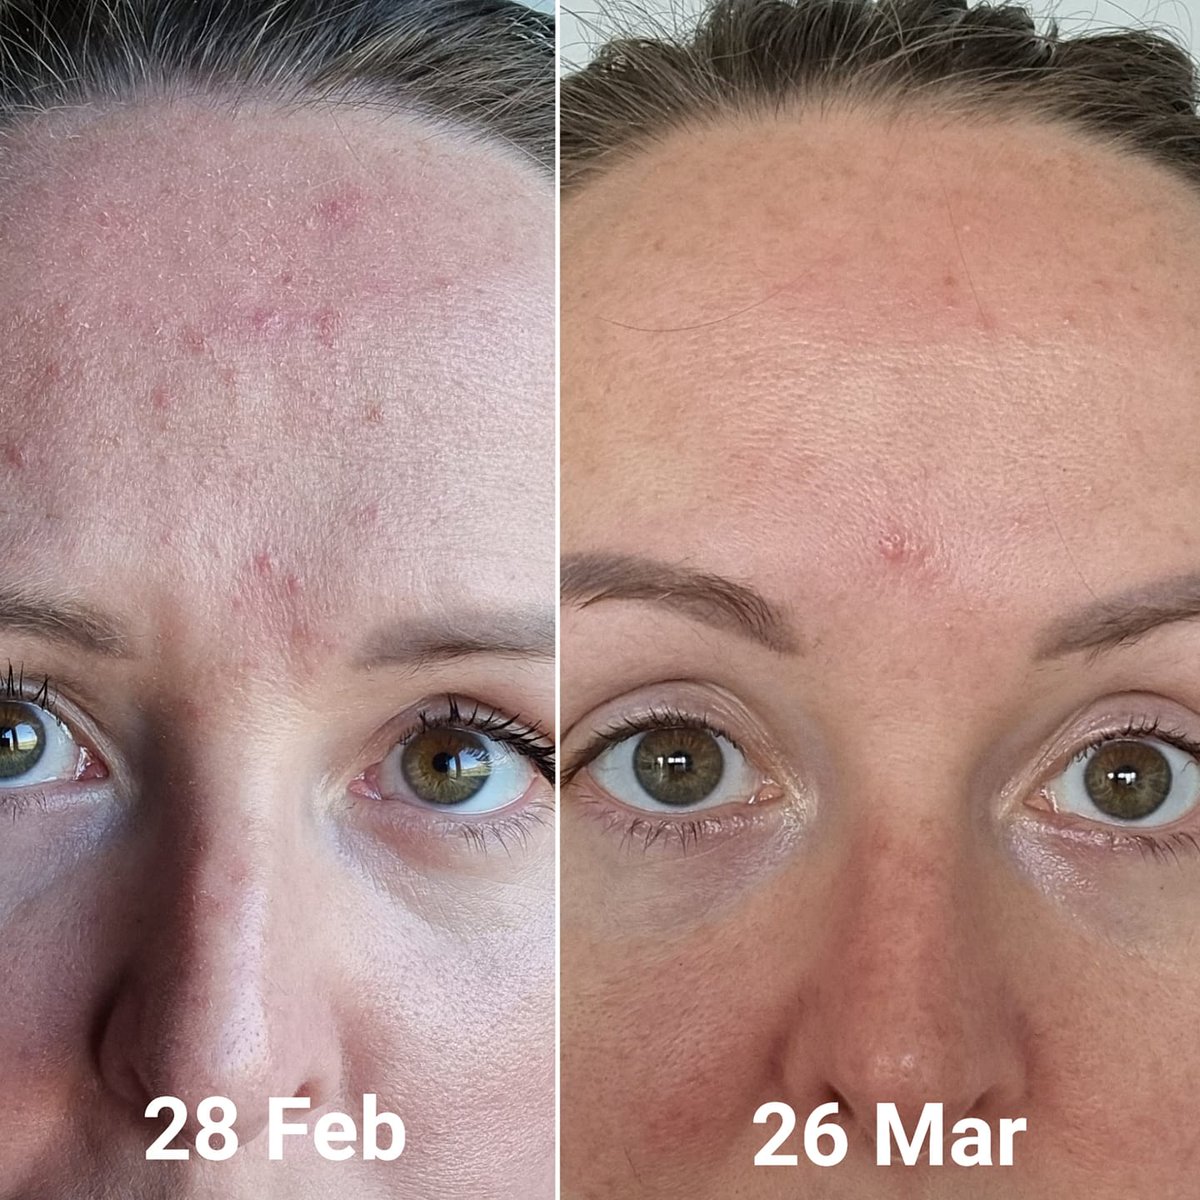 [Reposting Better Quality Image] @thebomb4 's skin became smoother, less congested, soothed and glowing with radiance using: 🌟 Miracle Cleanser 🔬 The Probiotic Concentrate 🌞 Cell Revitalise Day Moisturiser 🌜 Overnight Recovery Mask